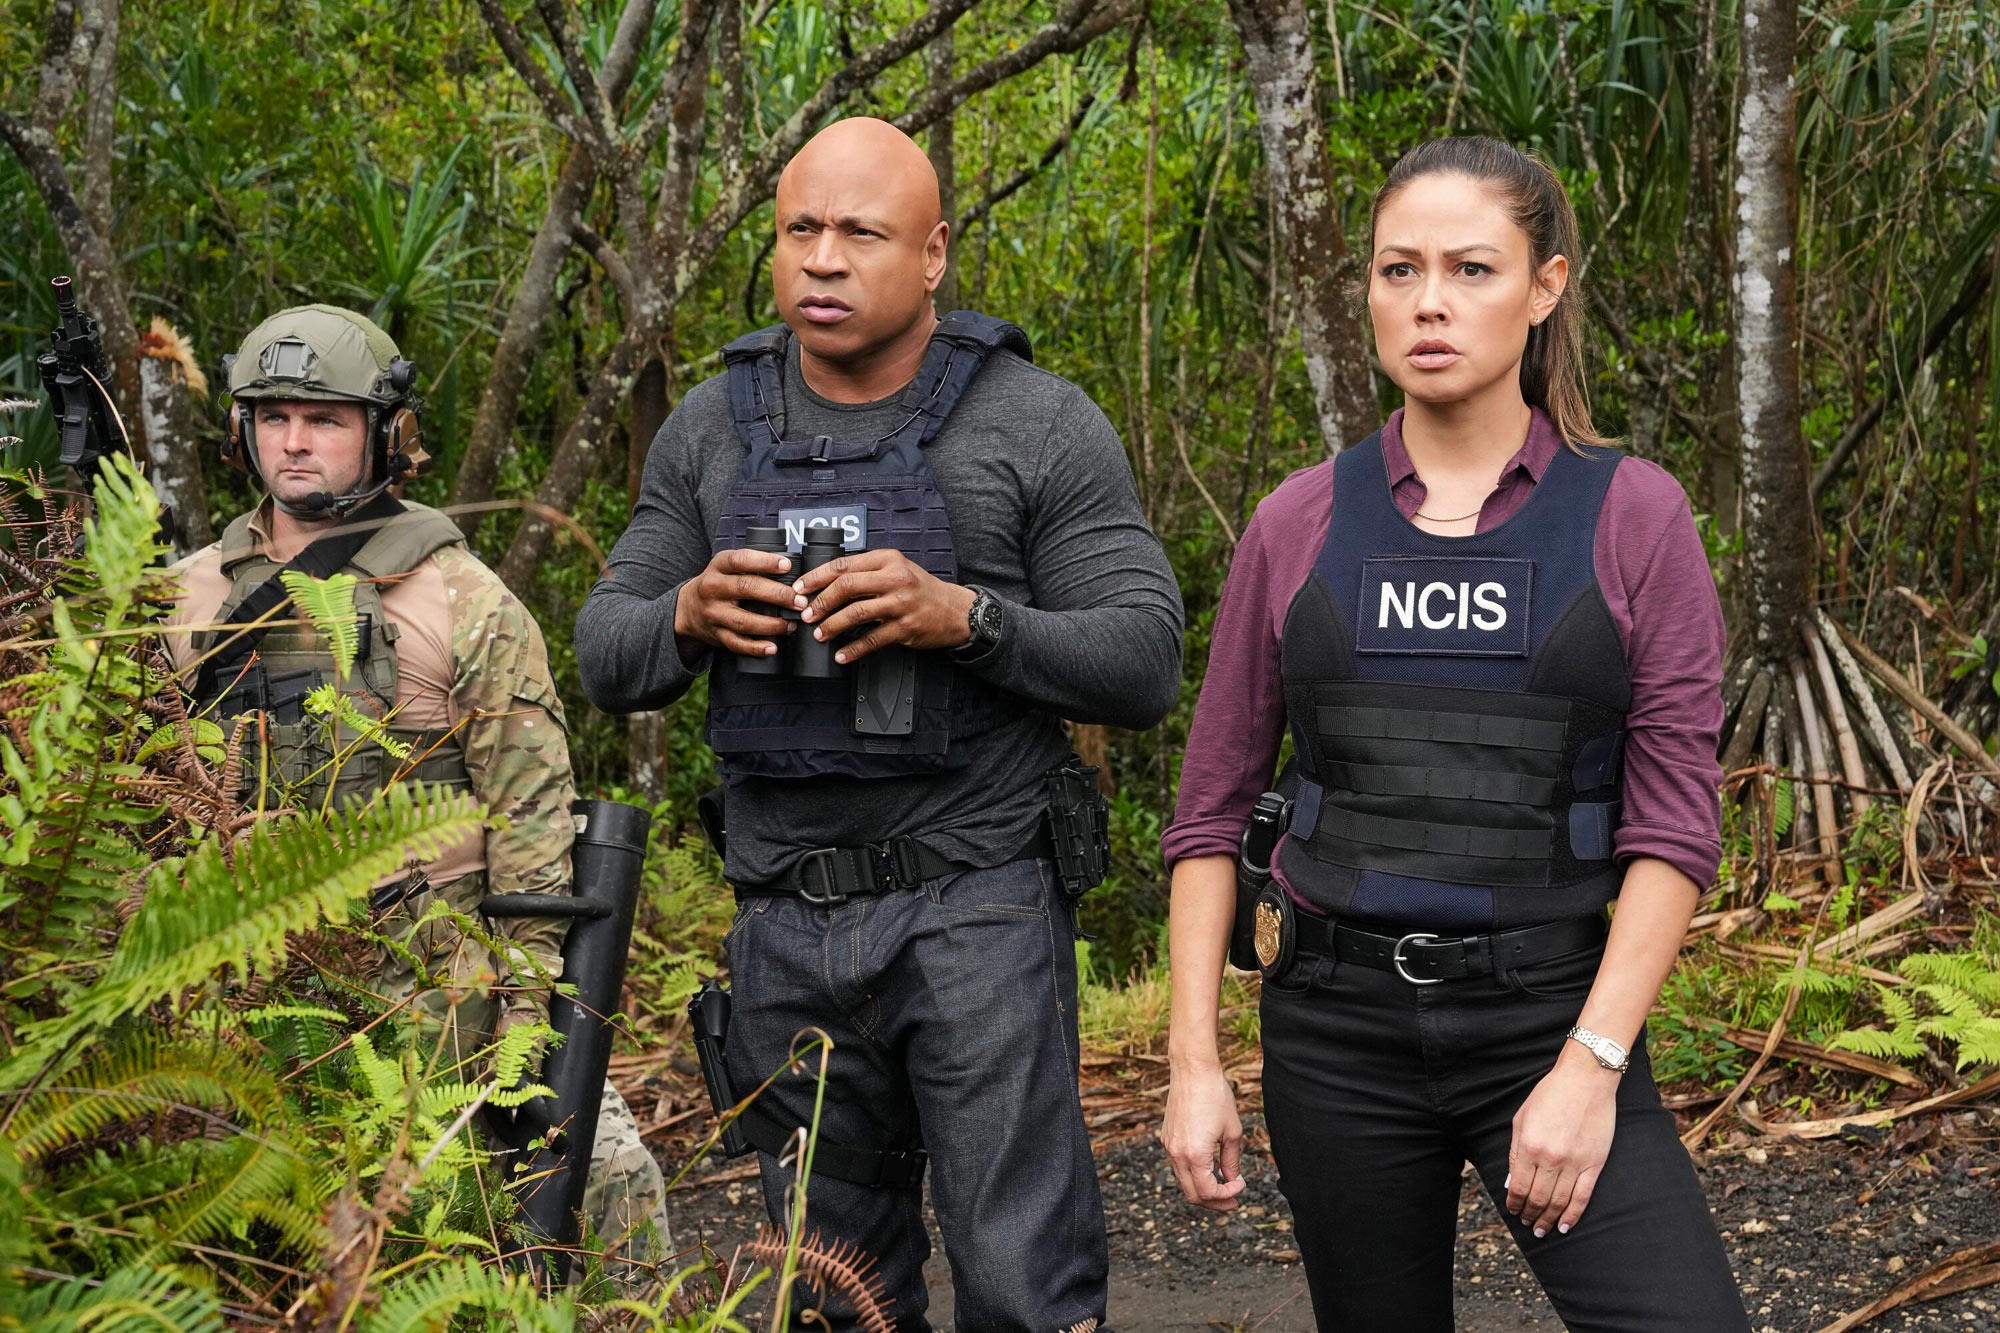 ‘NCIS: Hawai’i’ Fans Fight to Save the Series Amid Cancellation